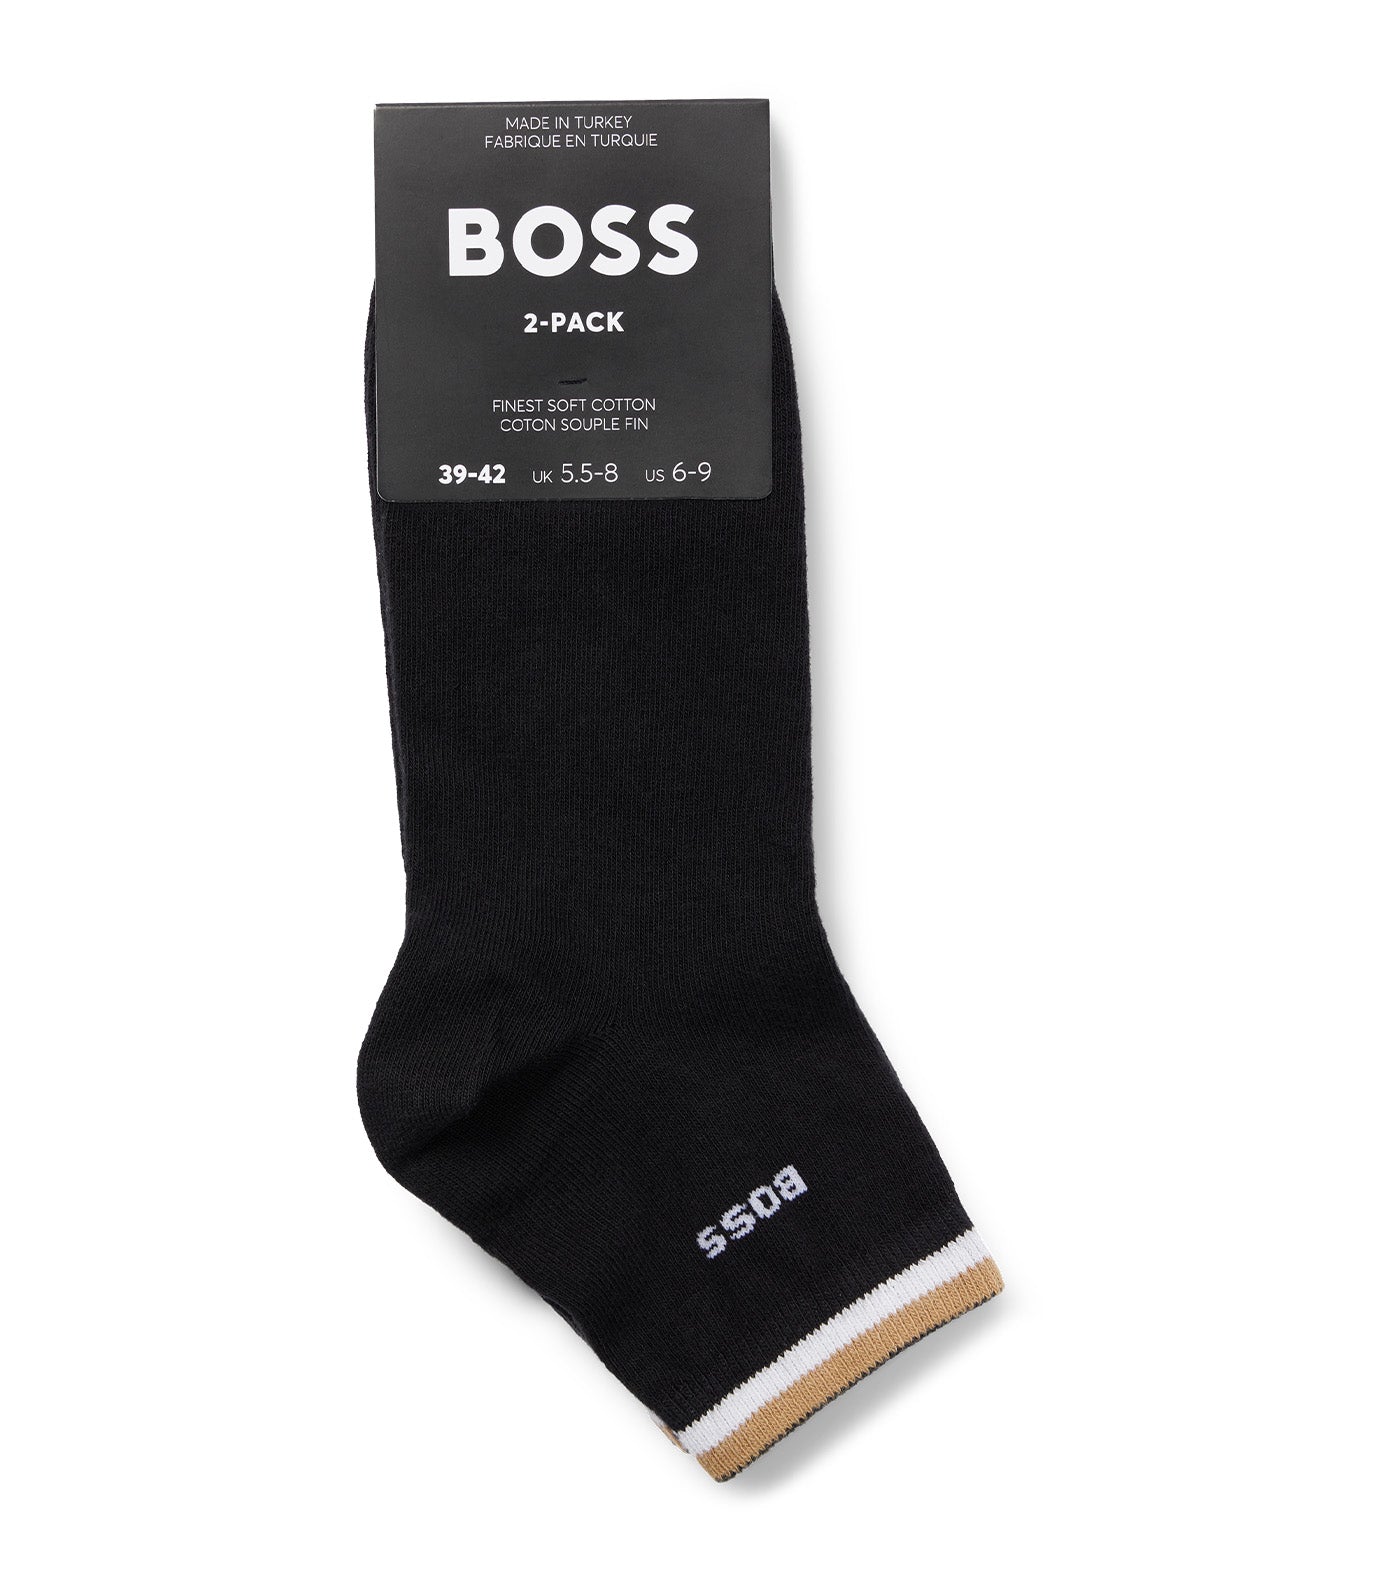 Two-Pack of Short-Length Socks with Signature Stripe Black